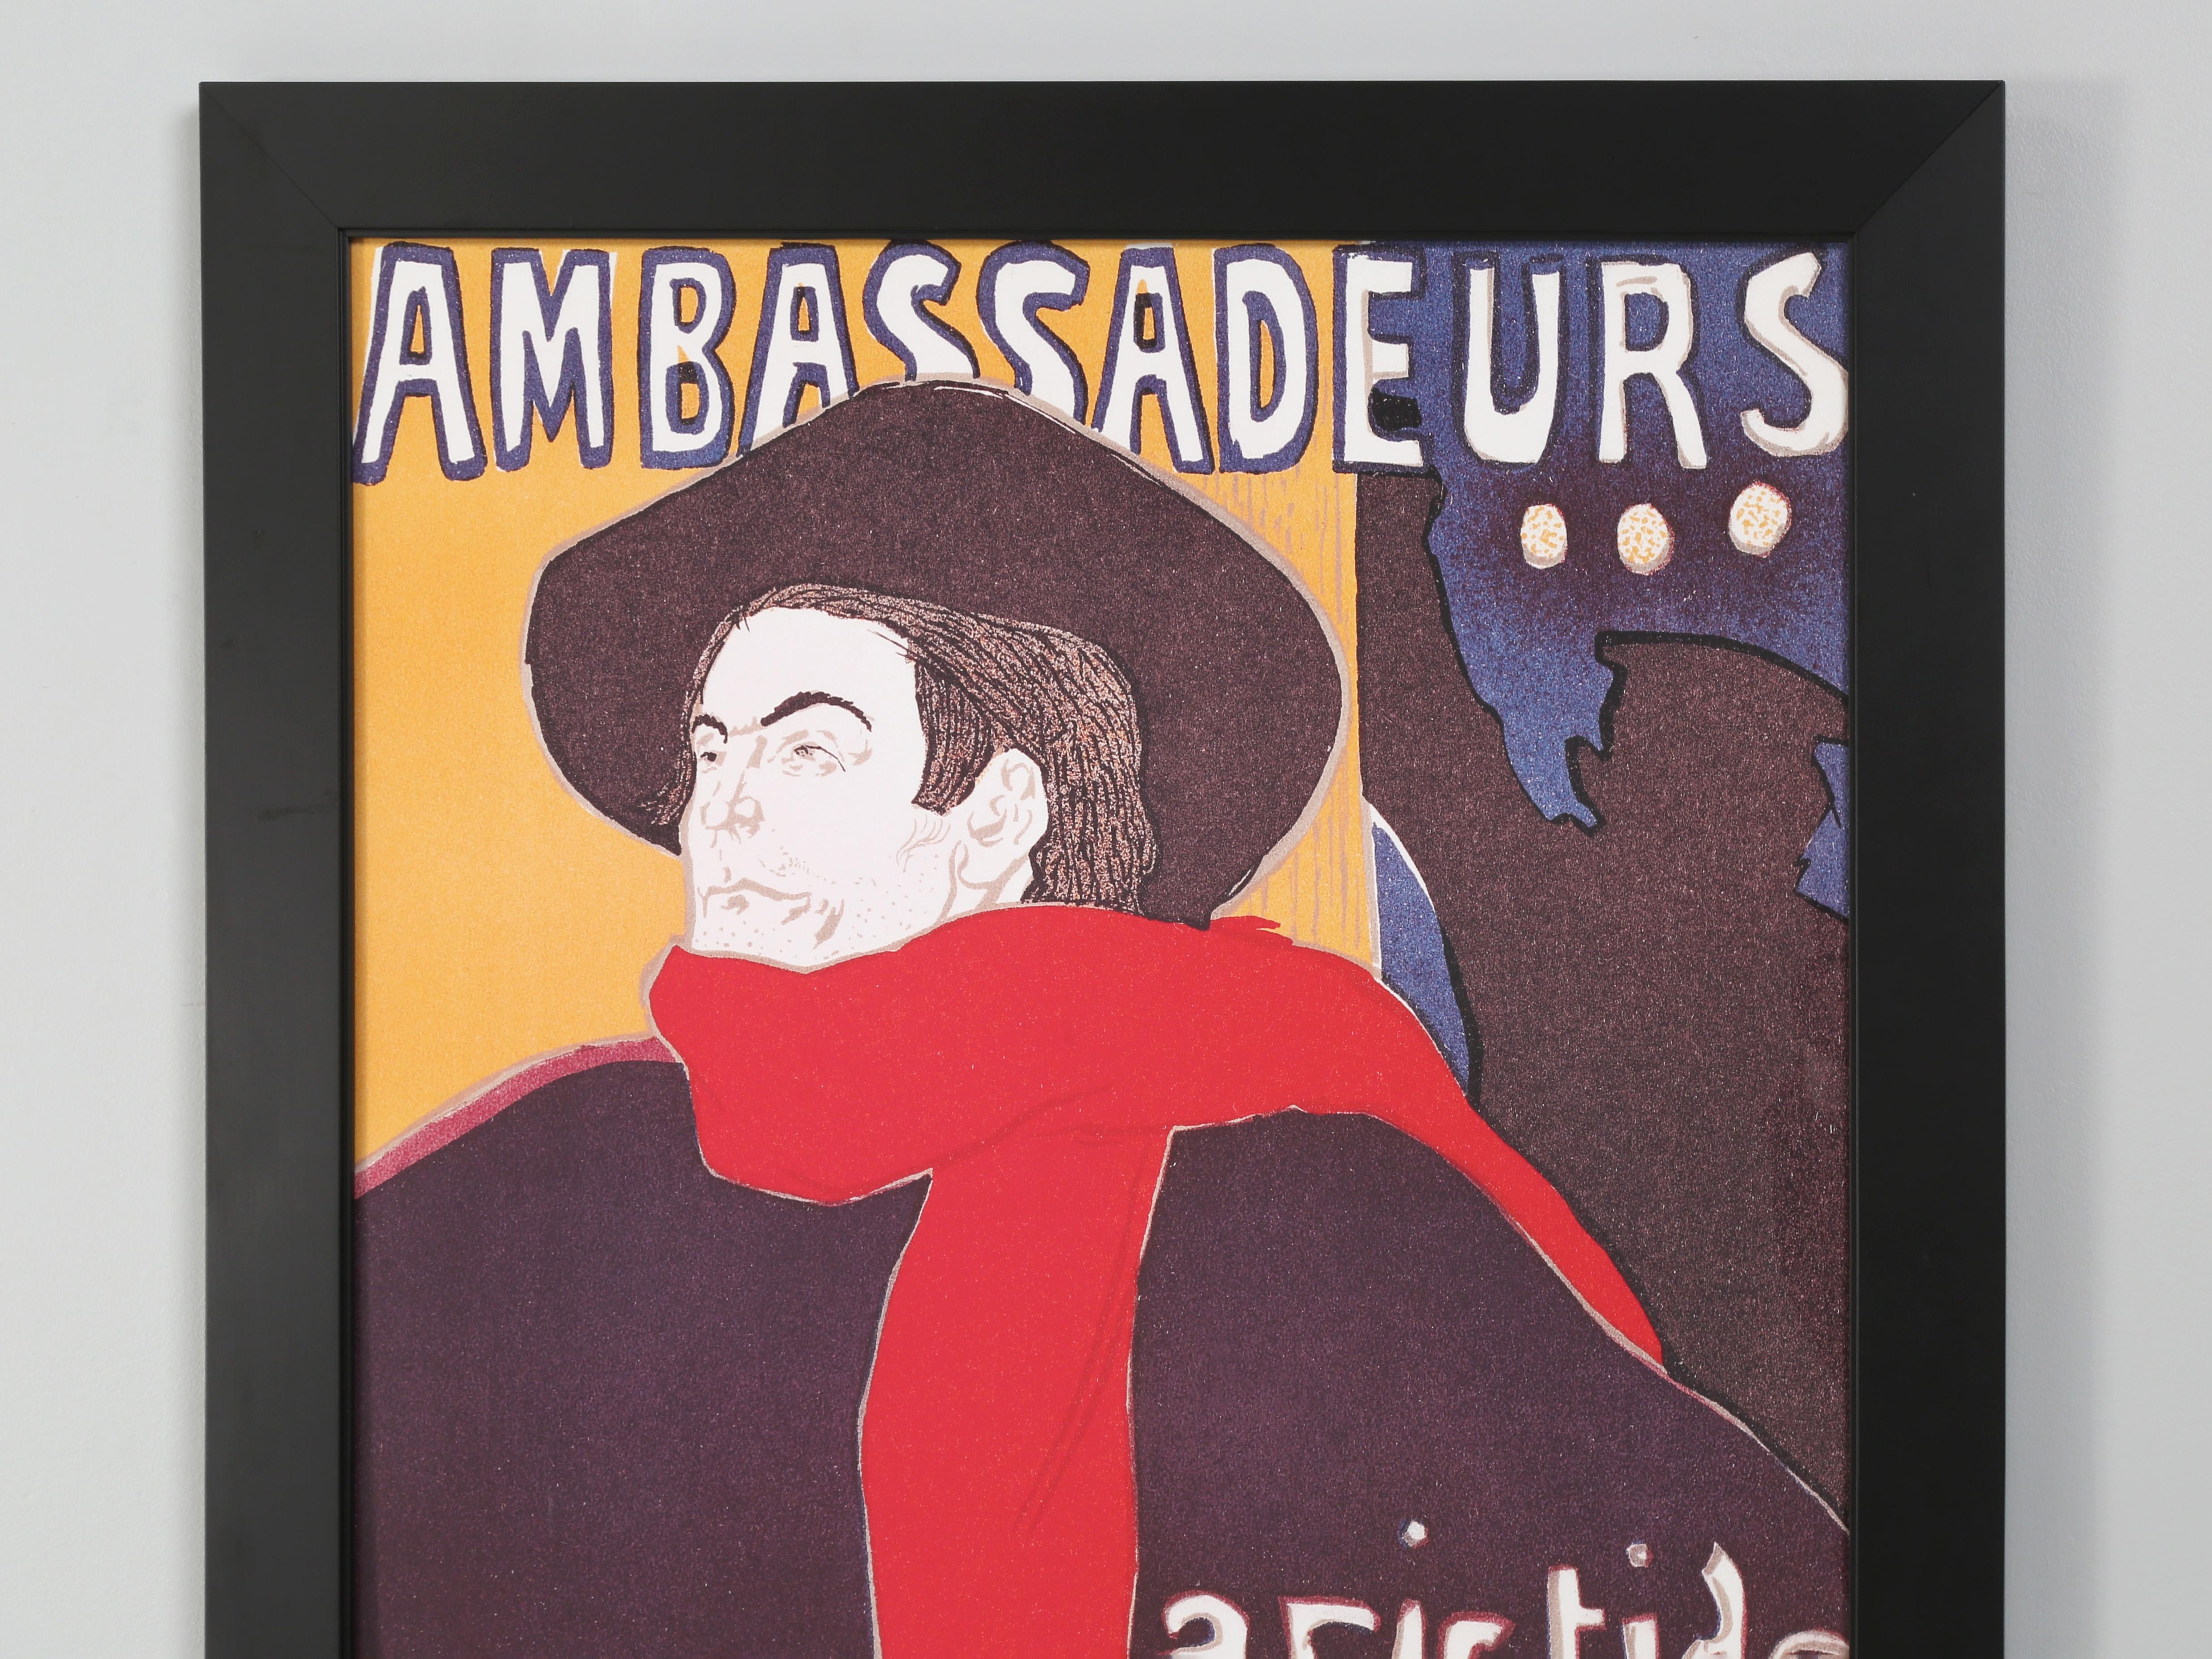 Henri de Toulouse-Lautrec was a French illustrator, painter and printmaker, whose subject matter detailed the bohemian lifestyle of Paris during the late 1800’s. 'Ambassadeurs: Aristide Bruant’ was a lithograph print originally produced by